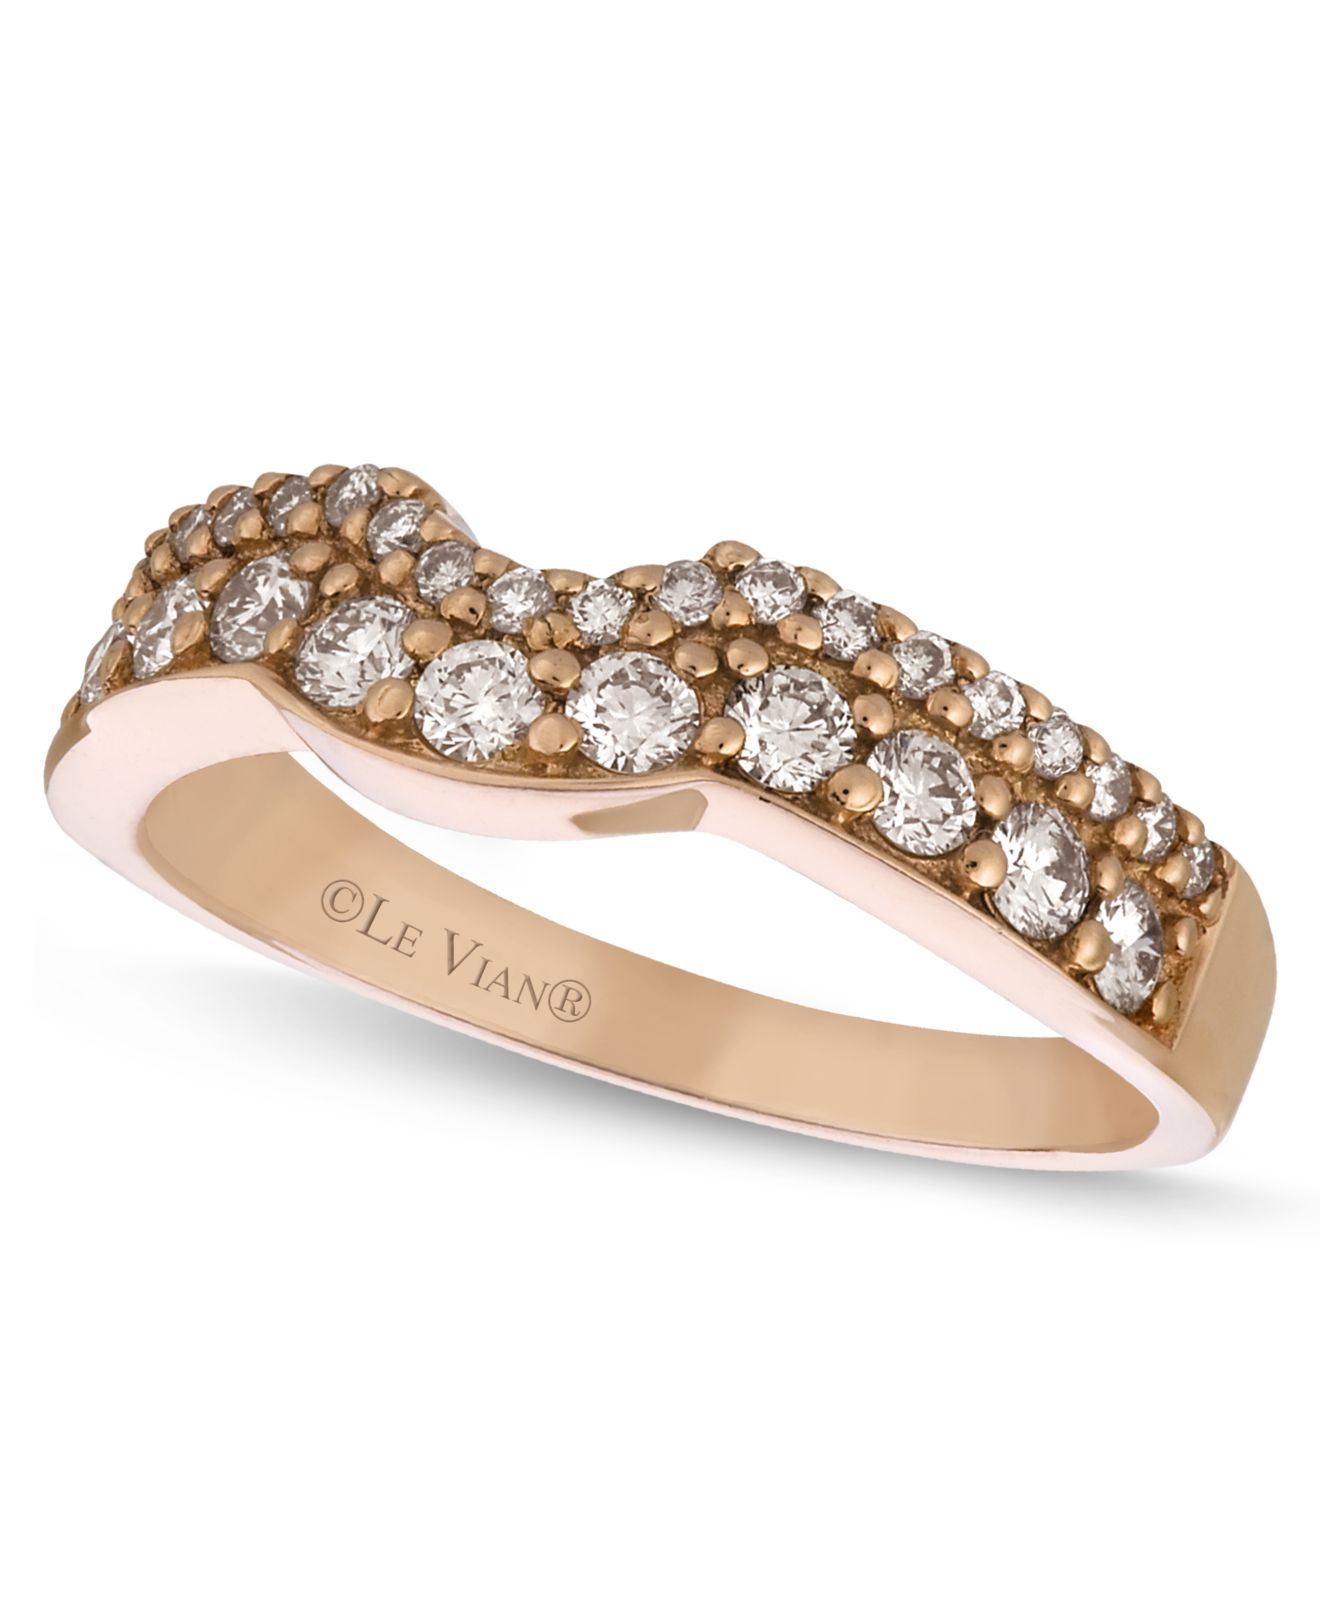 Lyst Le Vian Diamond Diamond Wedding Band (5/8 Ct. T.w.) In 14k Rose Gold in Pink